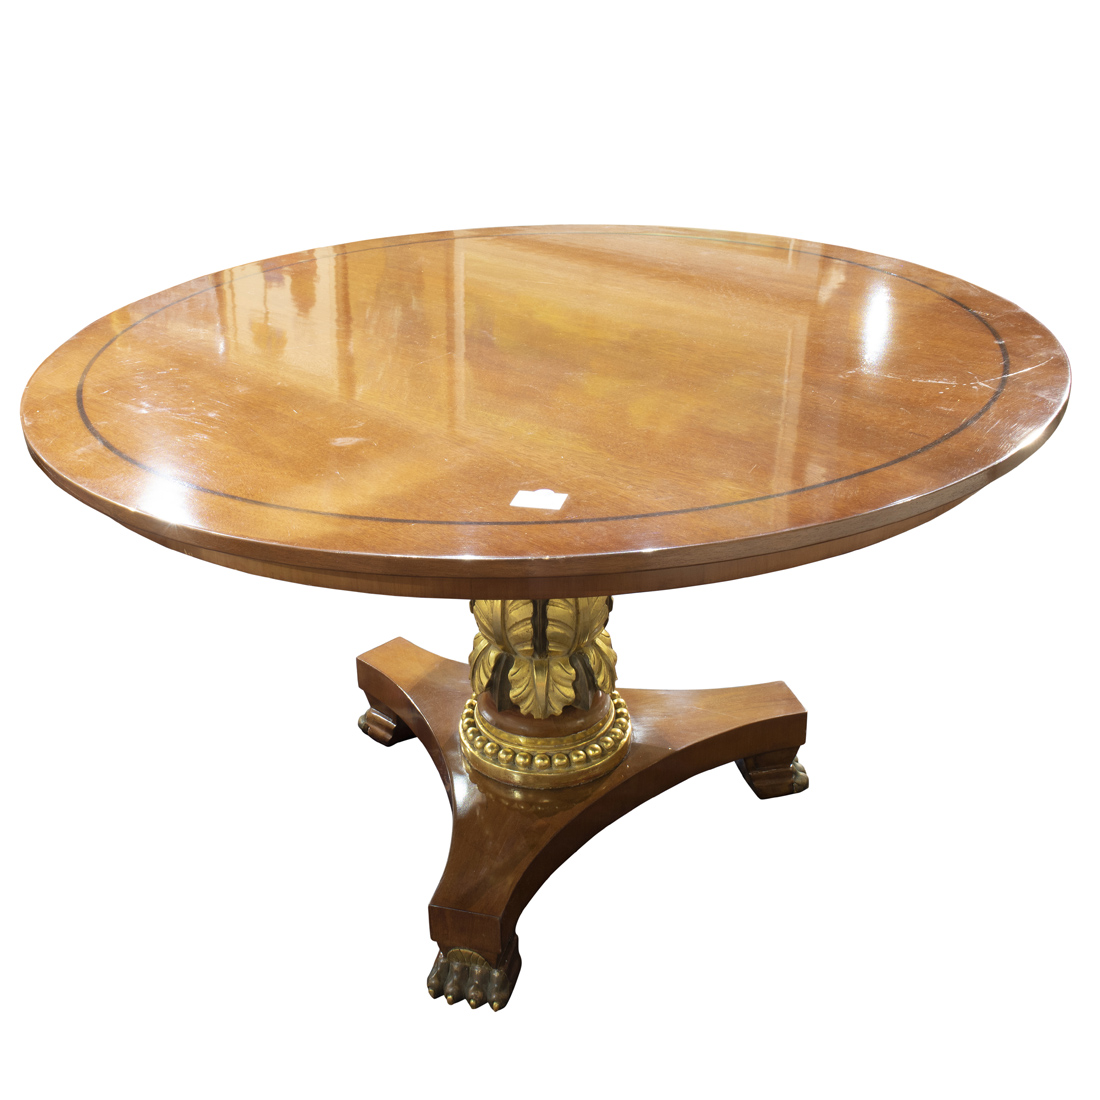 A FRENCY EMPIRE STYLE CENTER TABLE